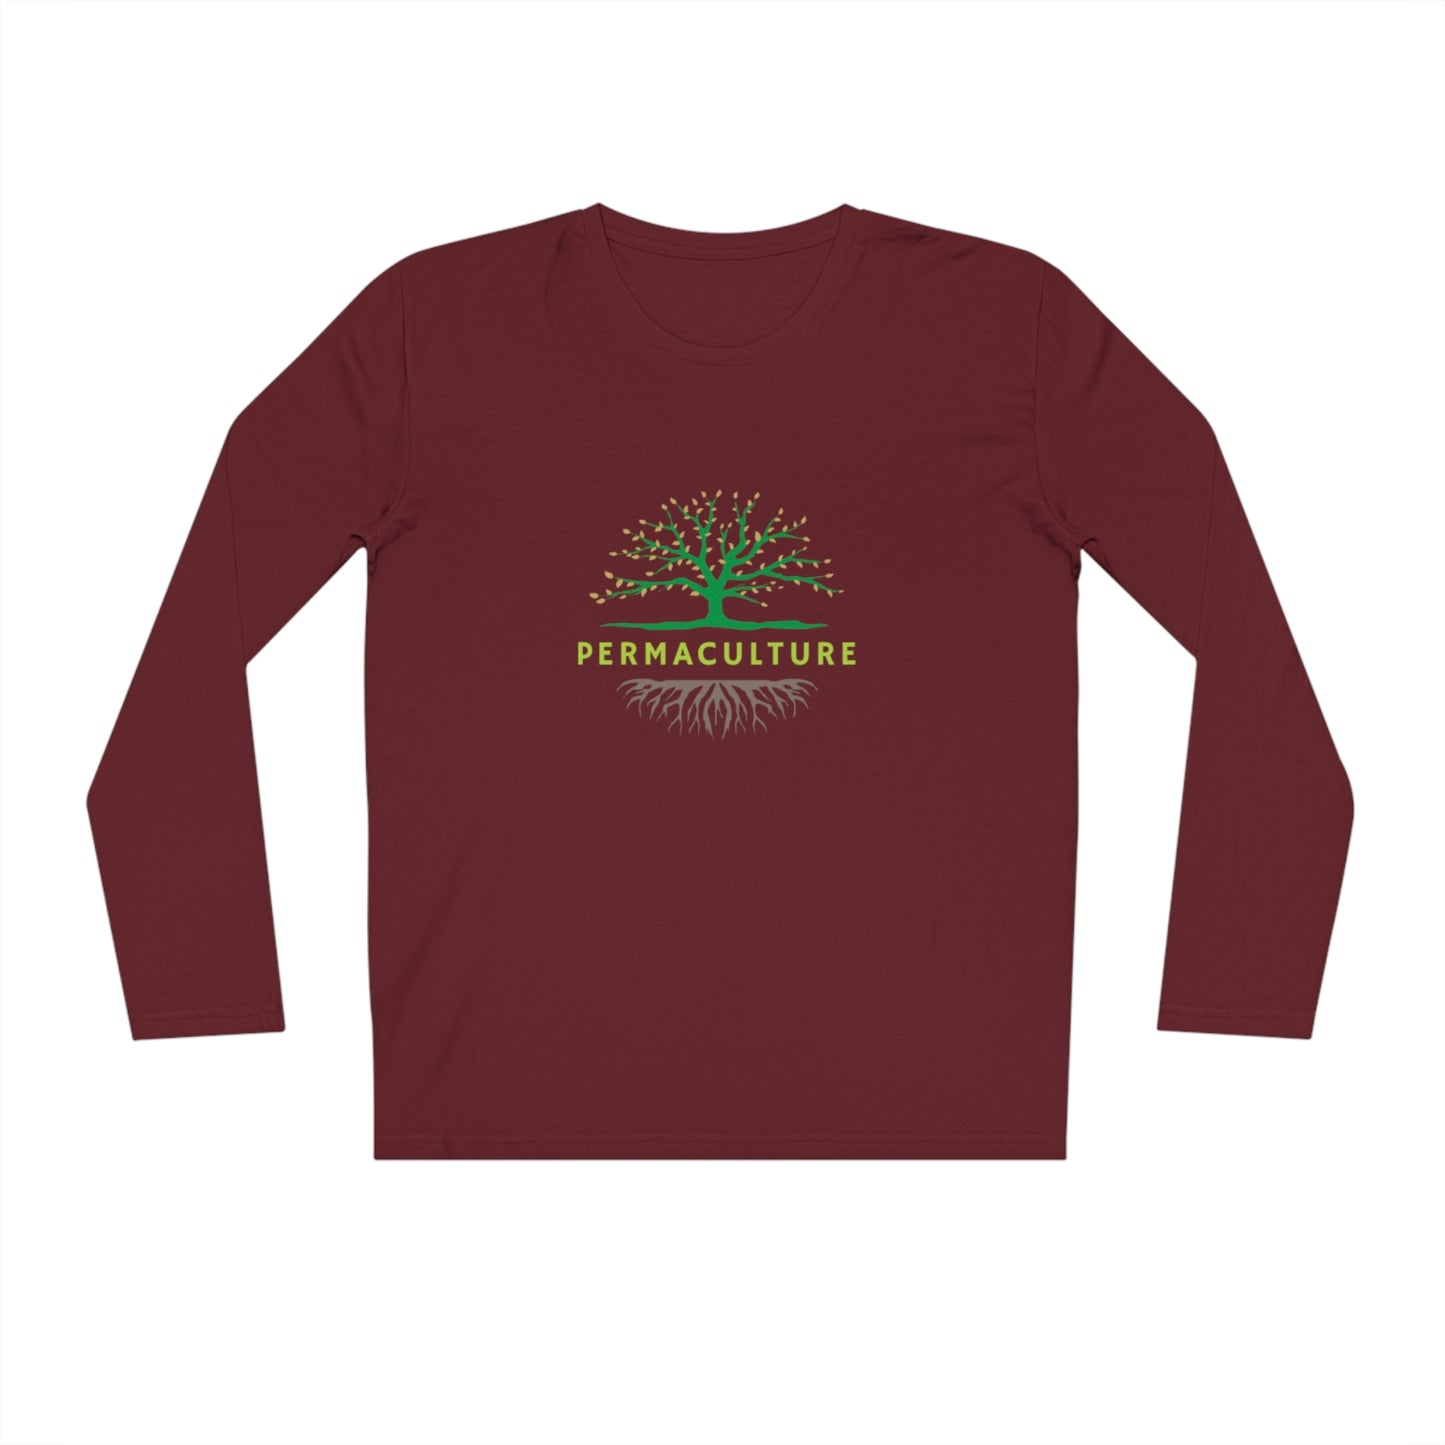 Permaculture - Men's Organic Sparker Long Sleeve Shirt